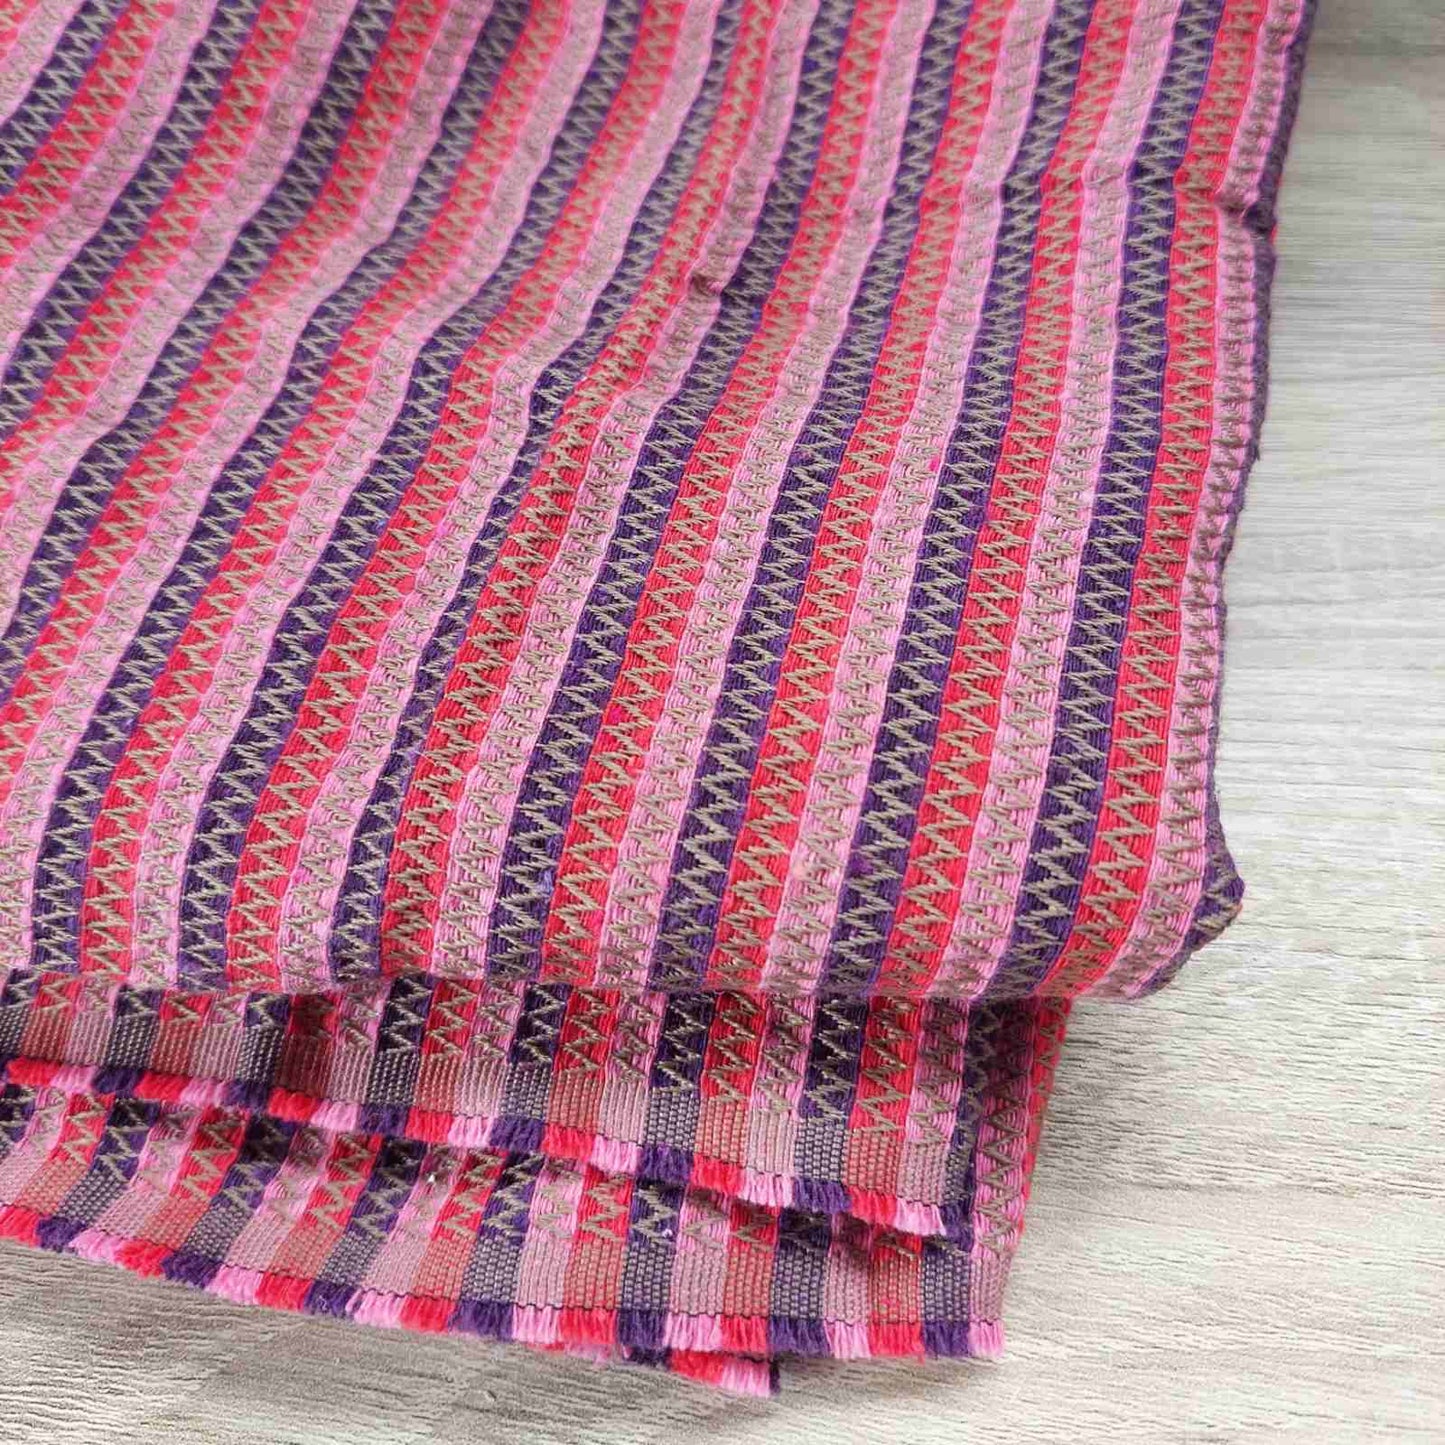 Recycled Fabric - Pink, purple & red stripes